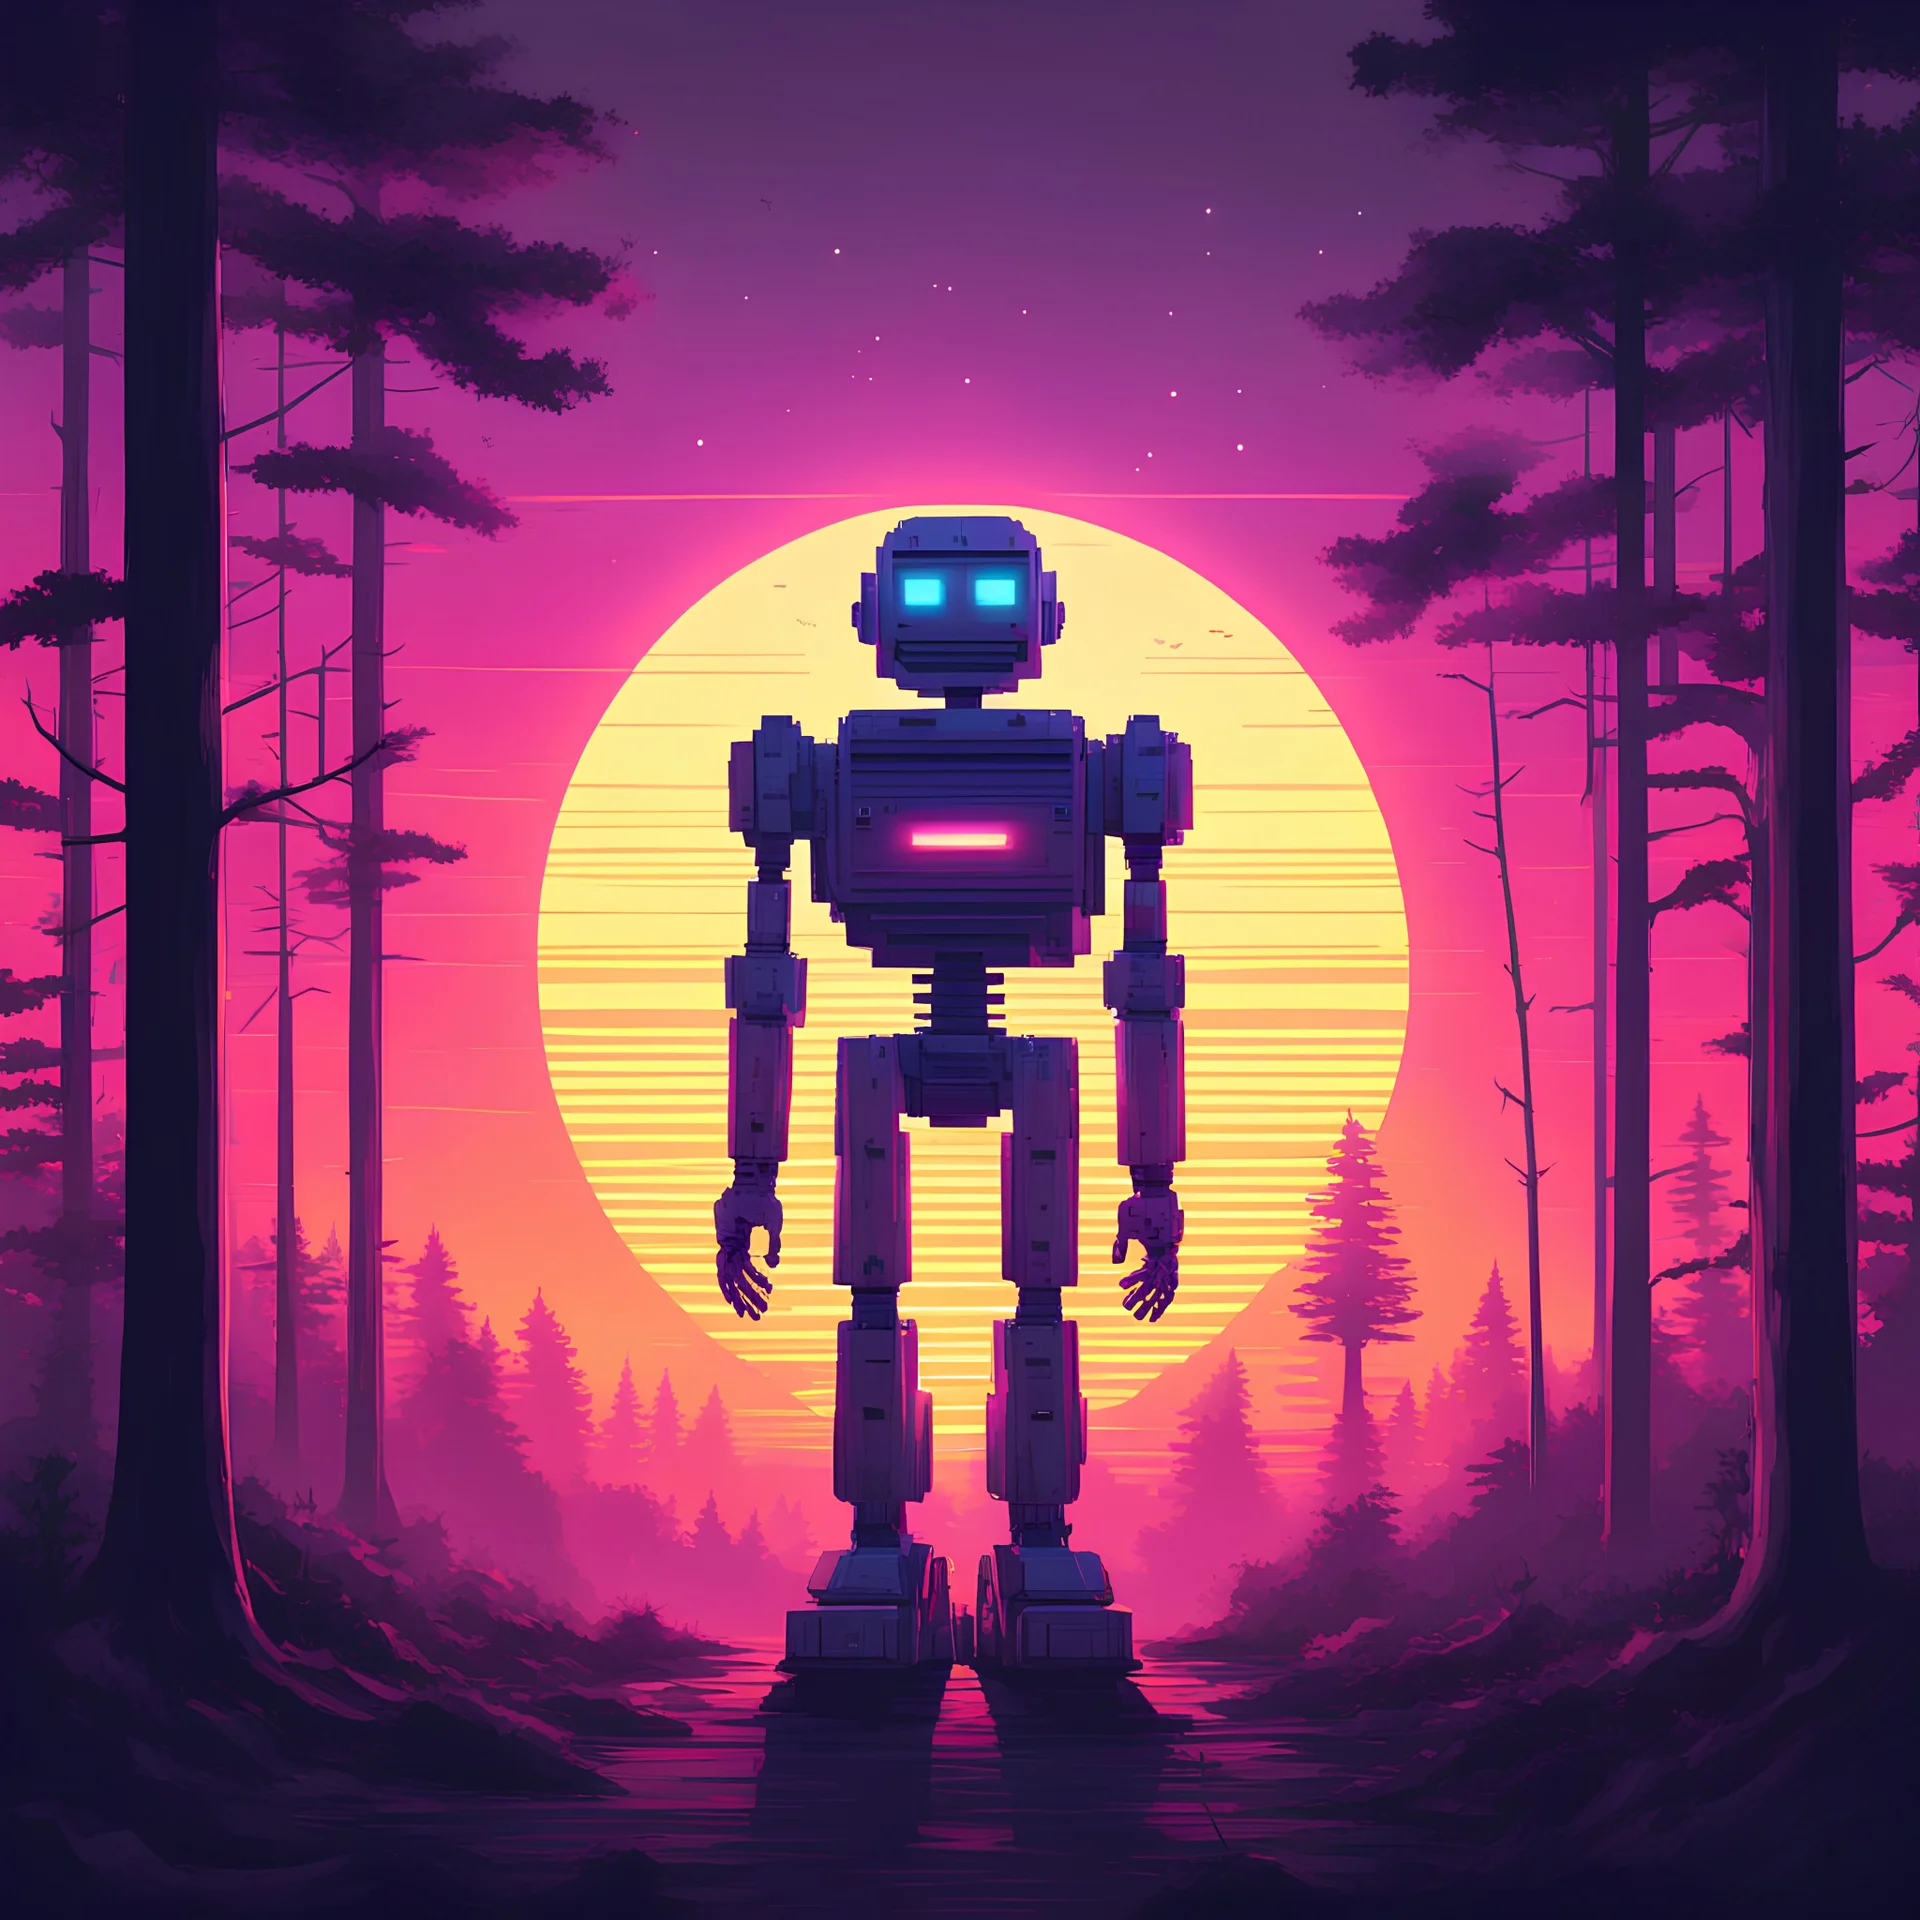 a silent robot in a wood , synthwave picture style with light pixel, the sunset on the horizon, with a big pixelated sun and a half moon